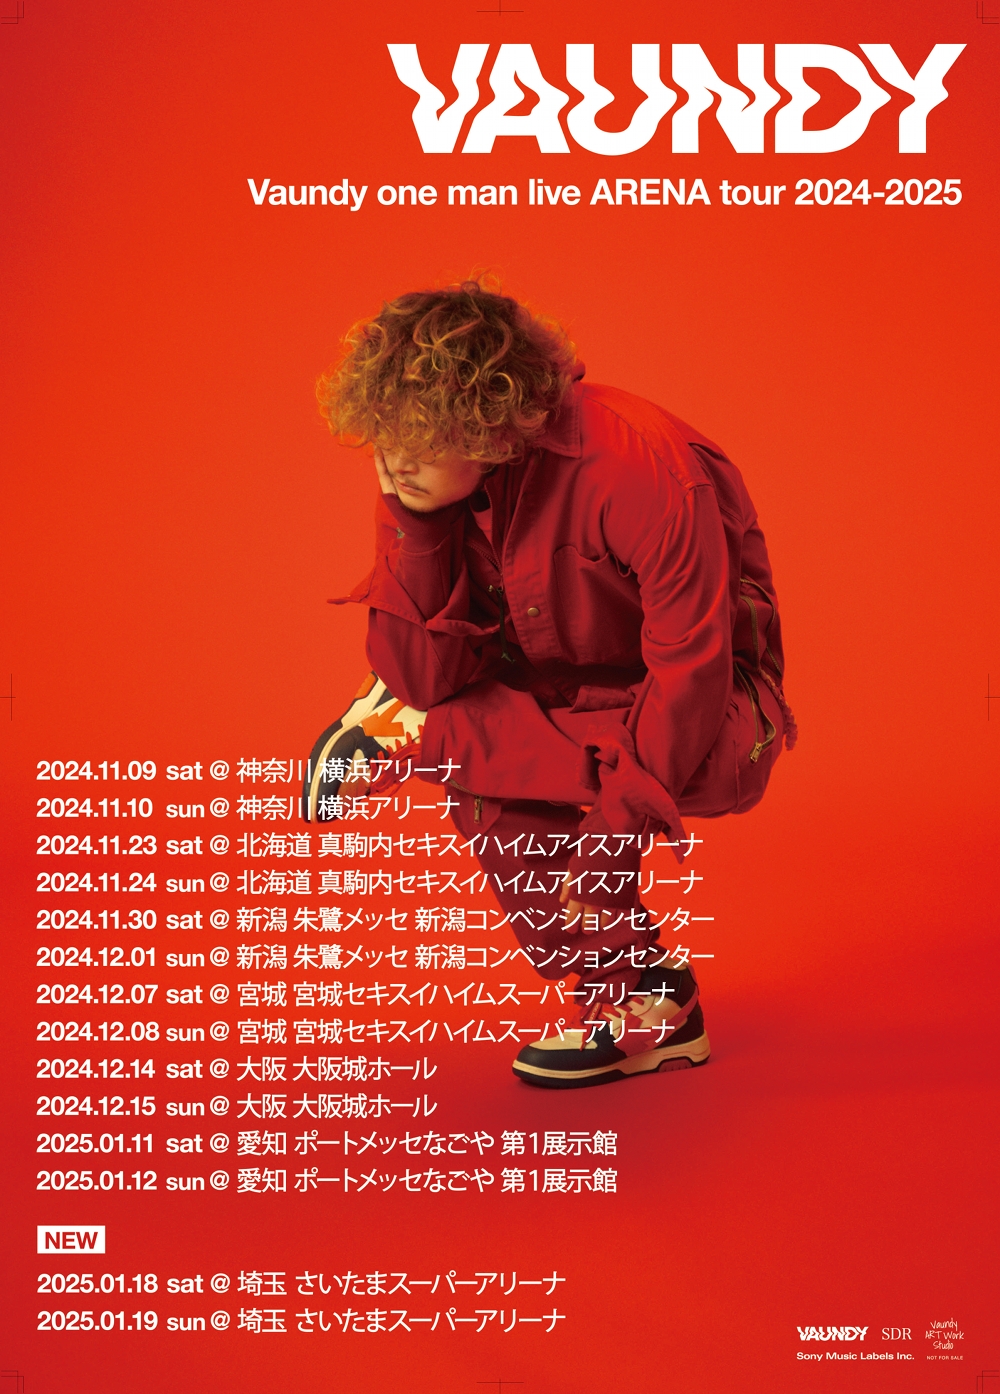 Vaundy one man live ARENA tour 2024-2025 さいたまスーパーアリーナ公演決定！ VAWS MEMBERSチケット 先行受付開始！